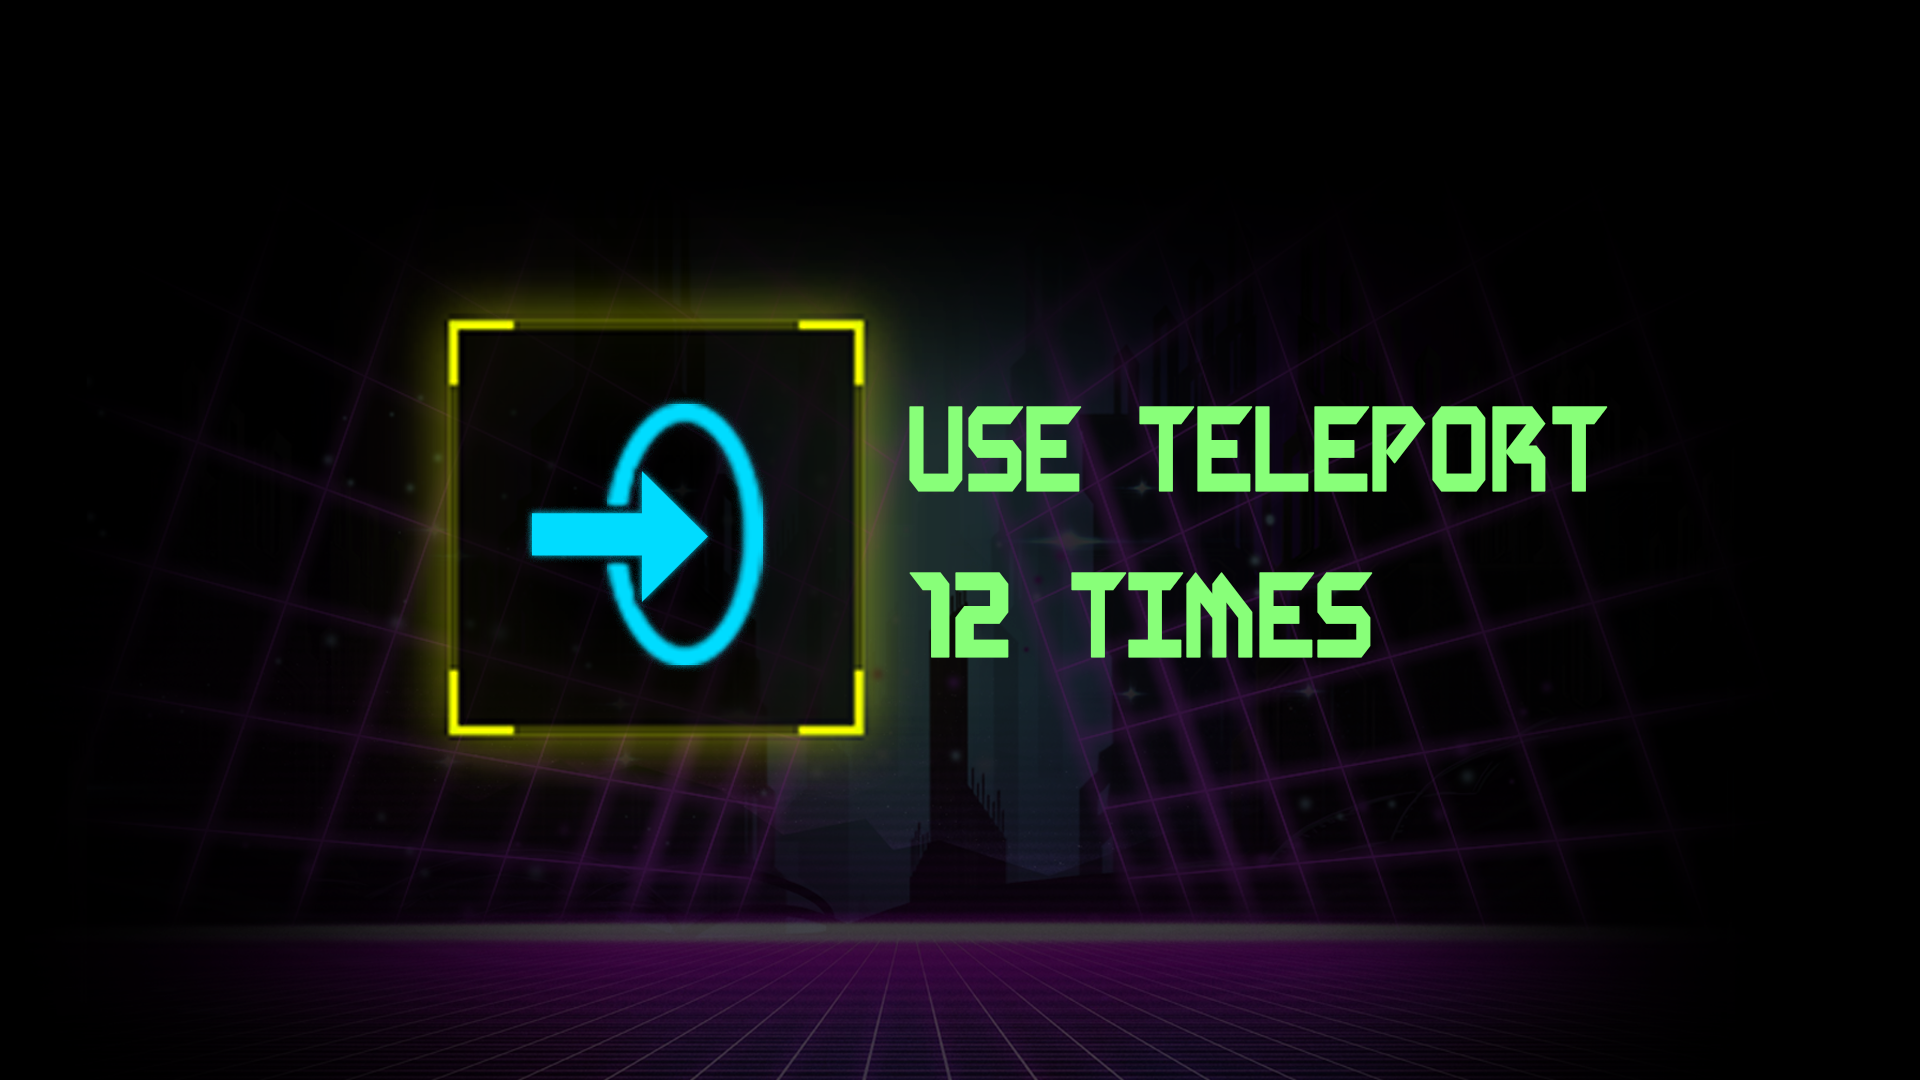 Use teleport 12 times